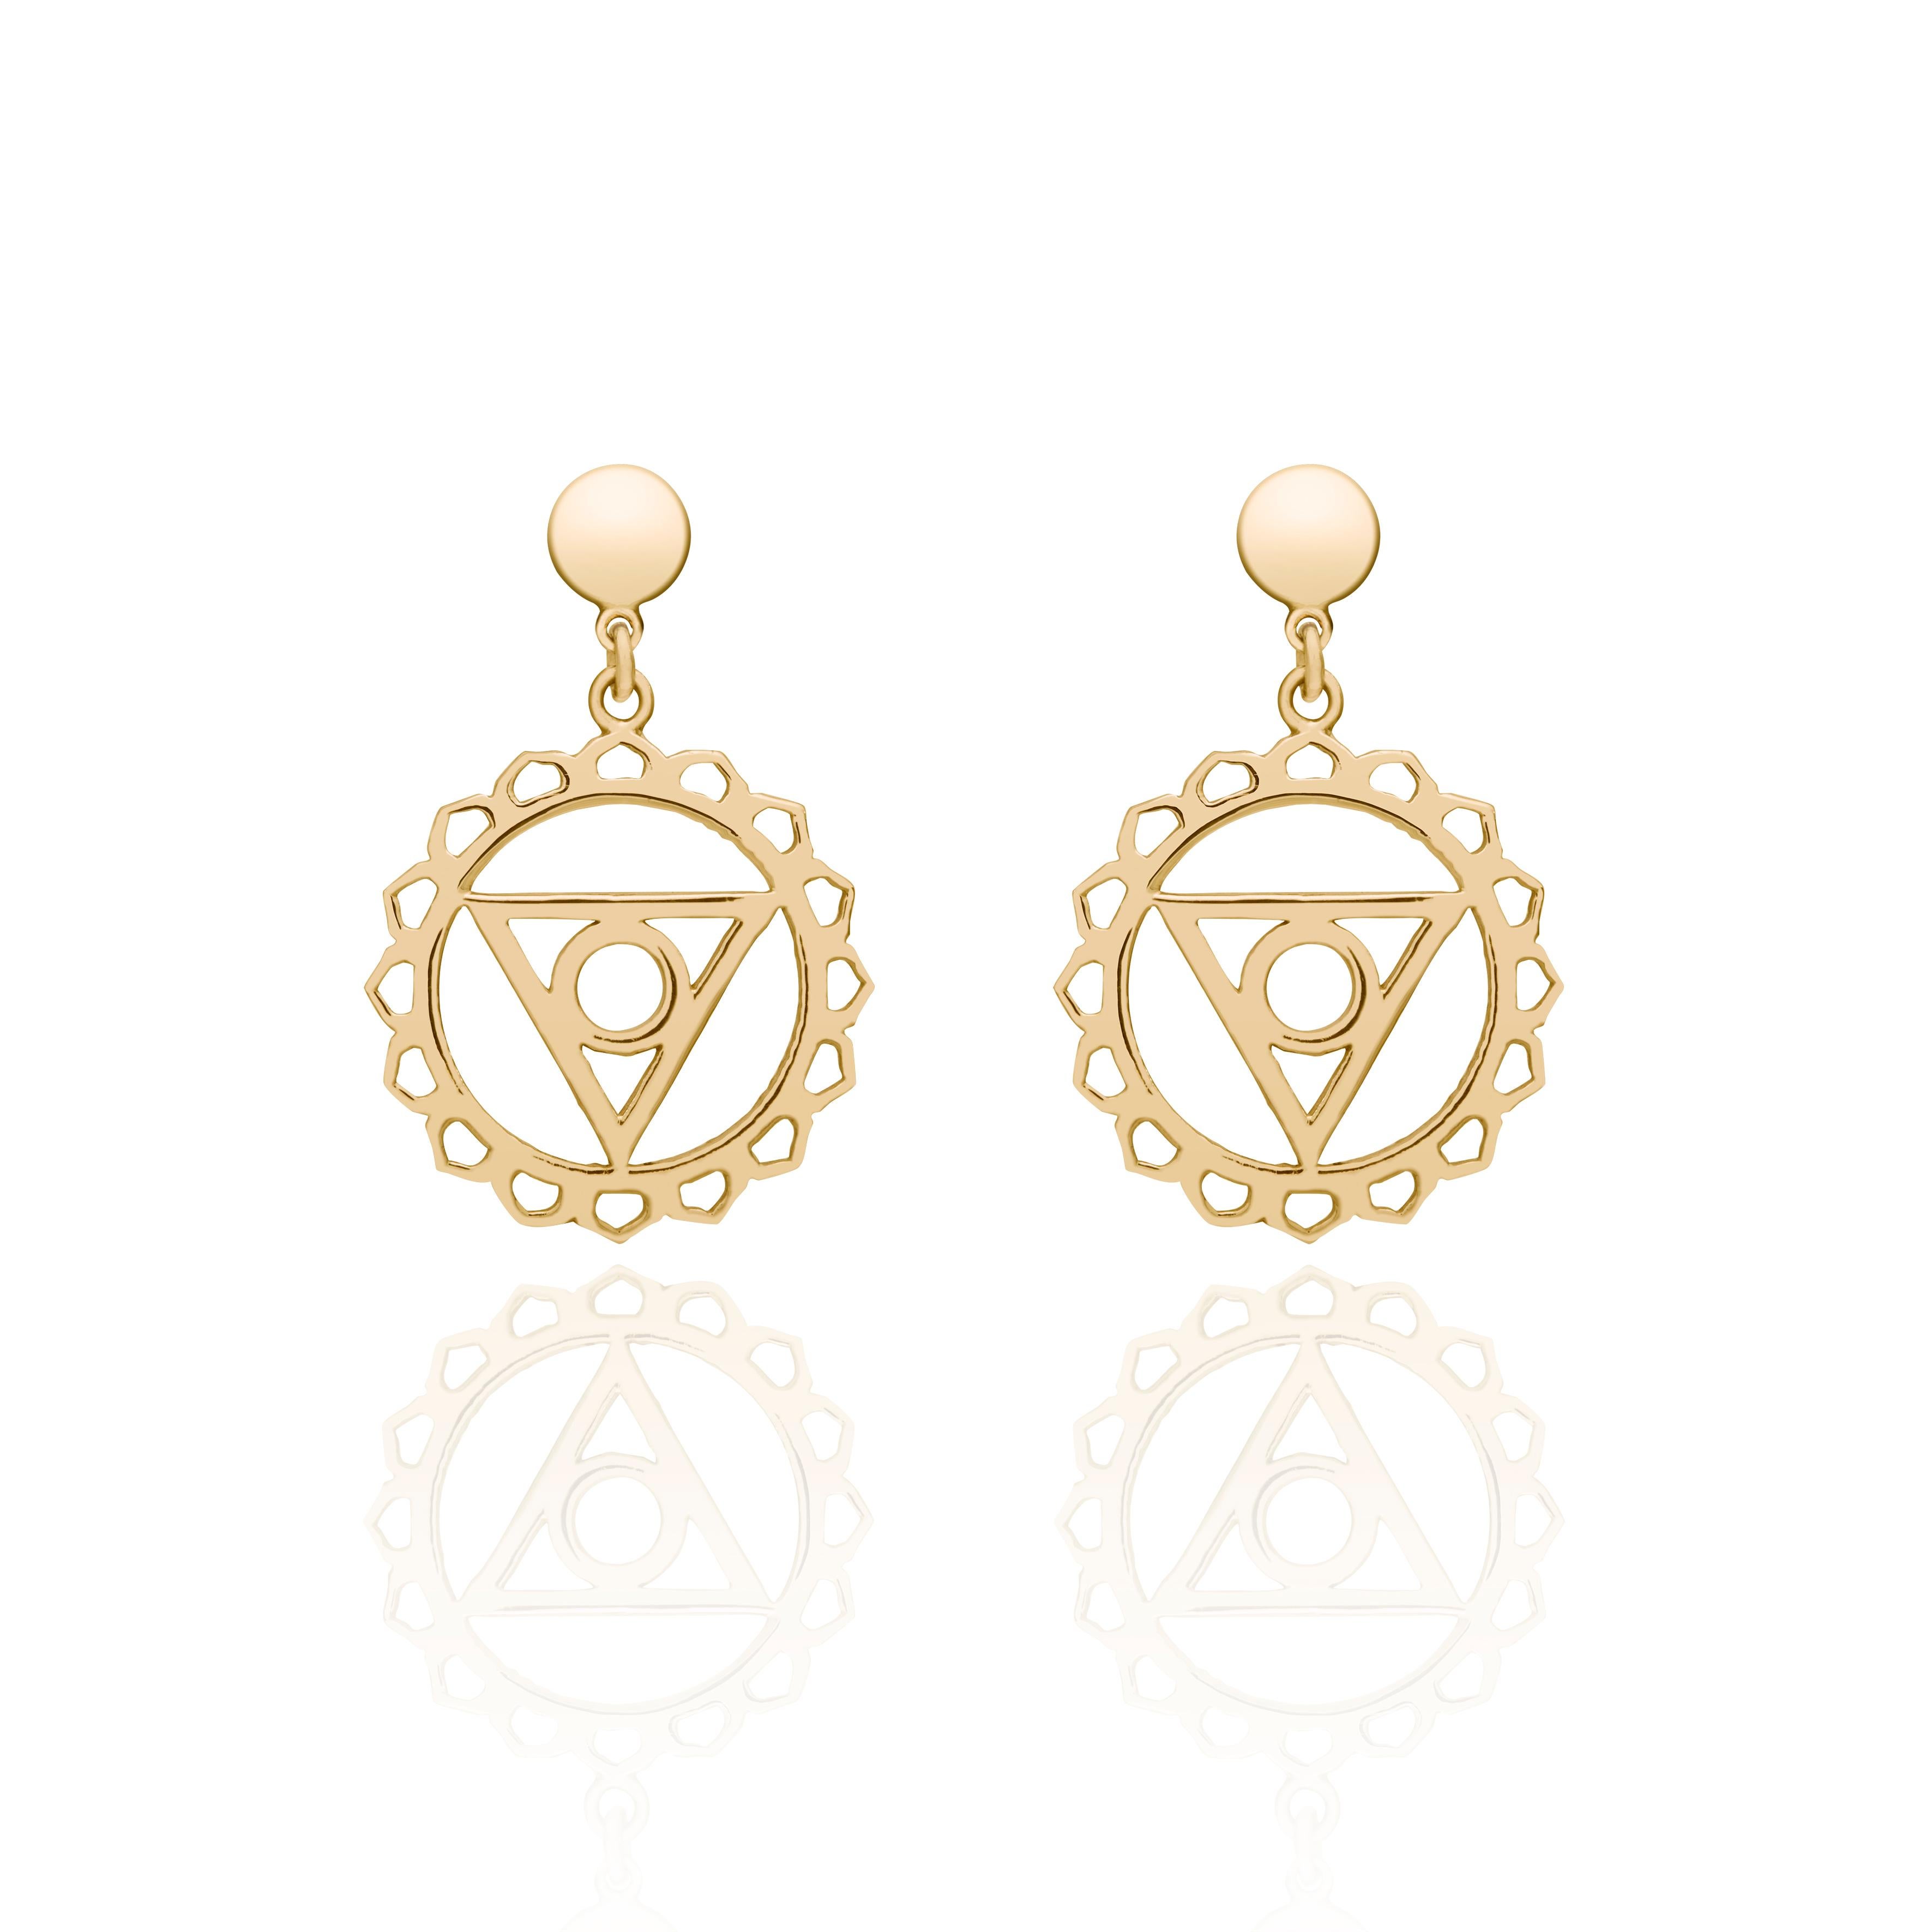 Unique pair of drop earrings inspired by Yoga Vissuddha- The Throat Chakra handcrafted in 14Kt Gold.
The Vissudha Chakra is the mental center of our body that is located in our throat. It is strongly connected with truth, communication, aim and art